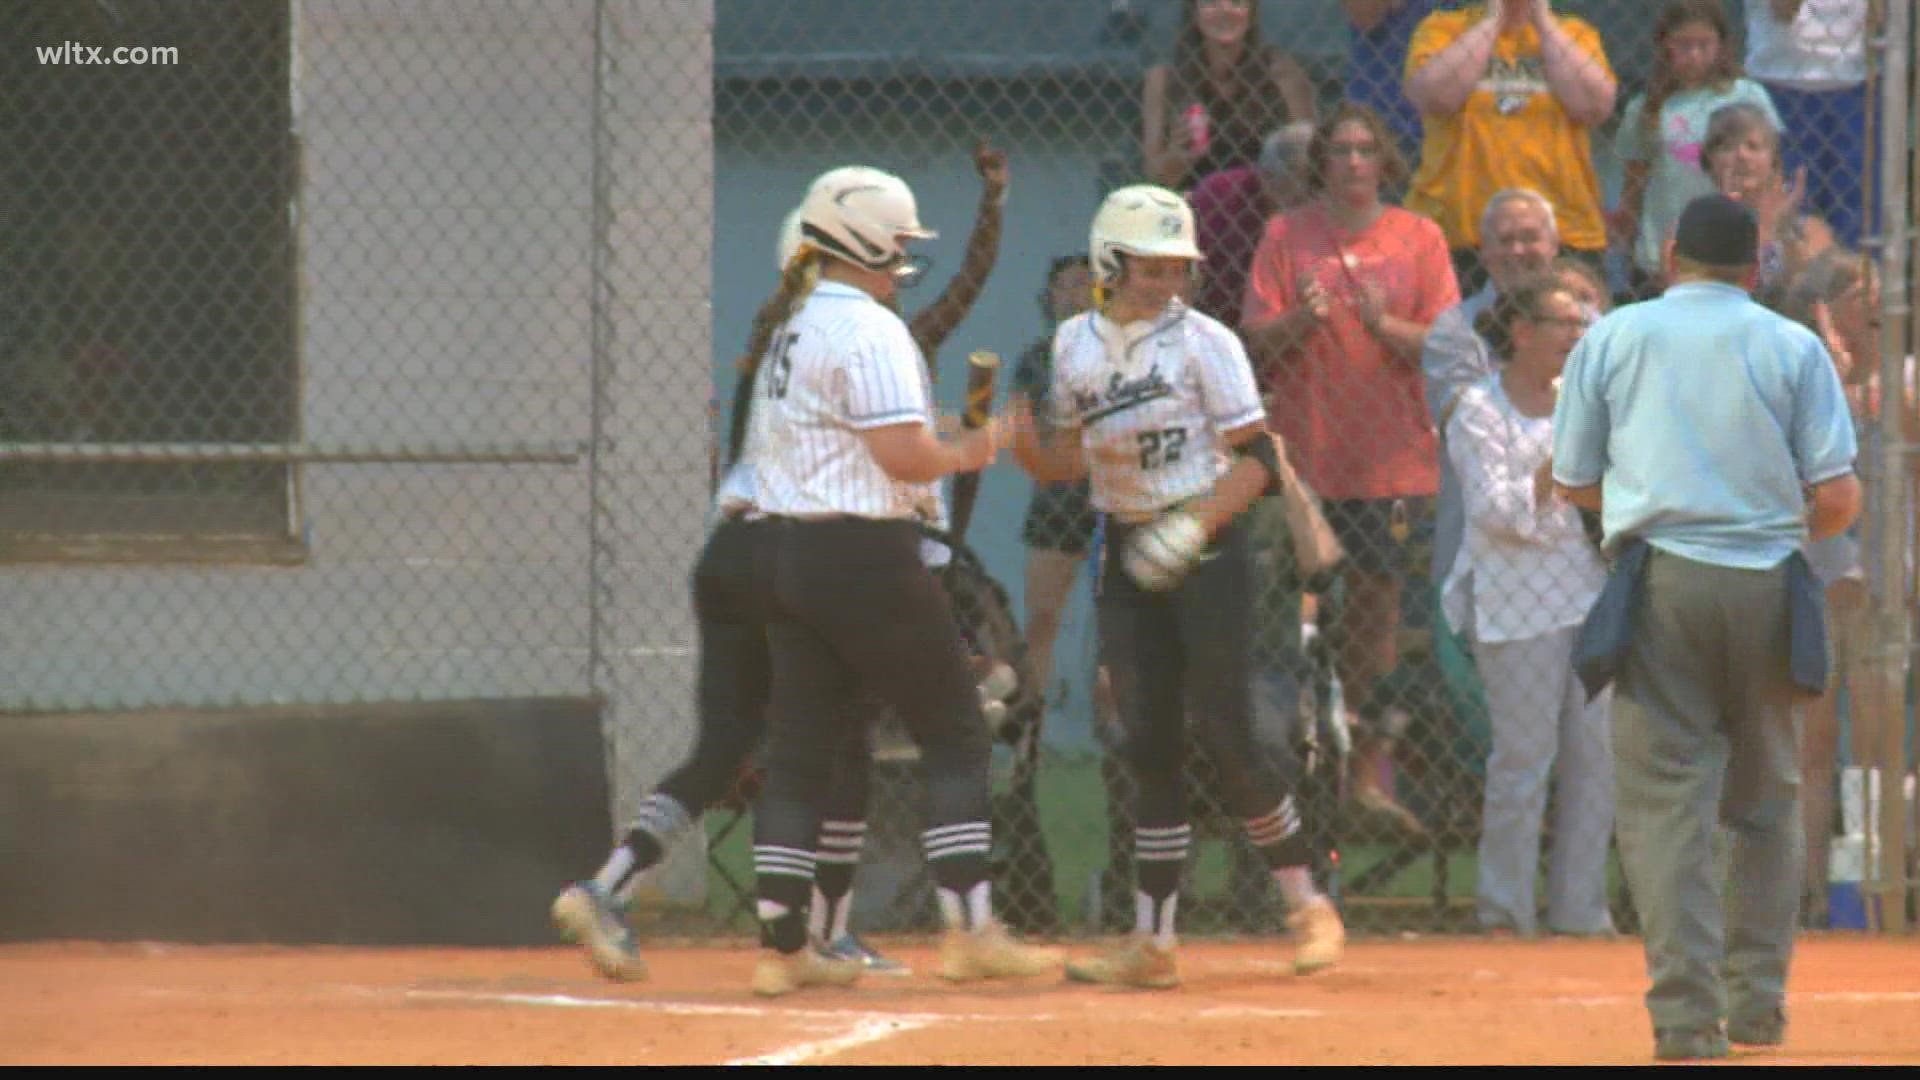 Gray Collegiate Academy punched its ticket to the Class 2A softball state championship series with an 11-7 win over Crescent.